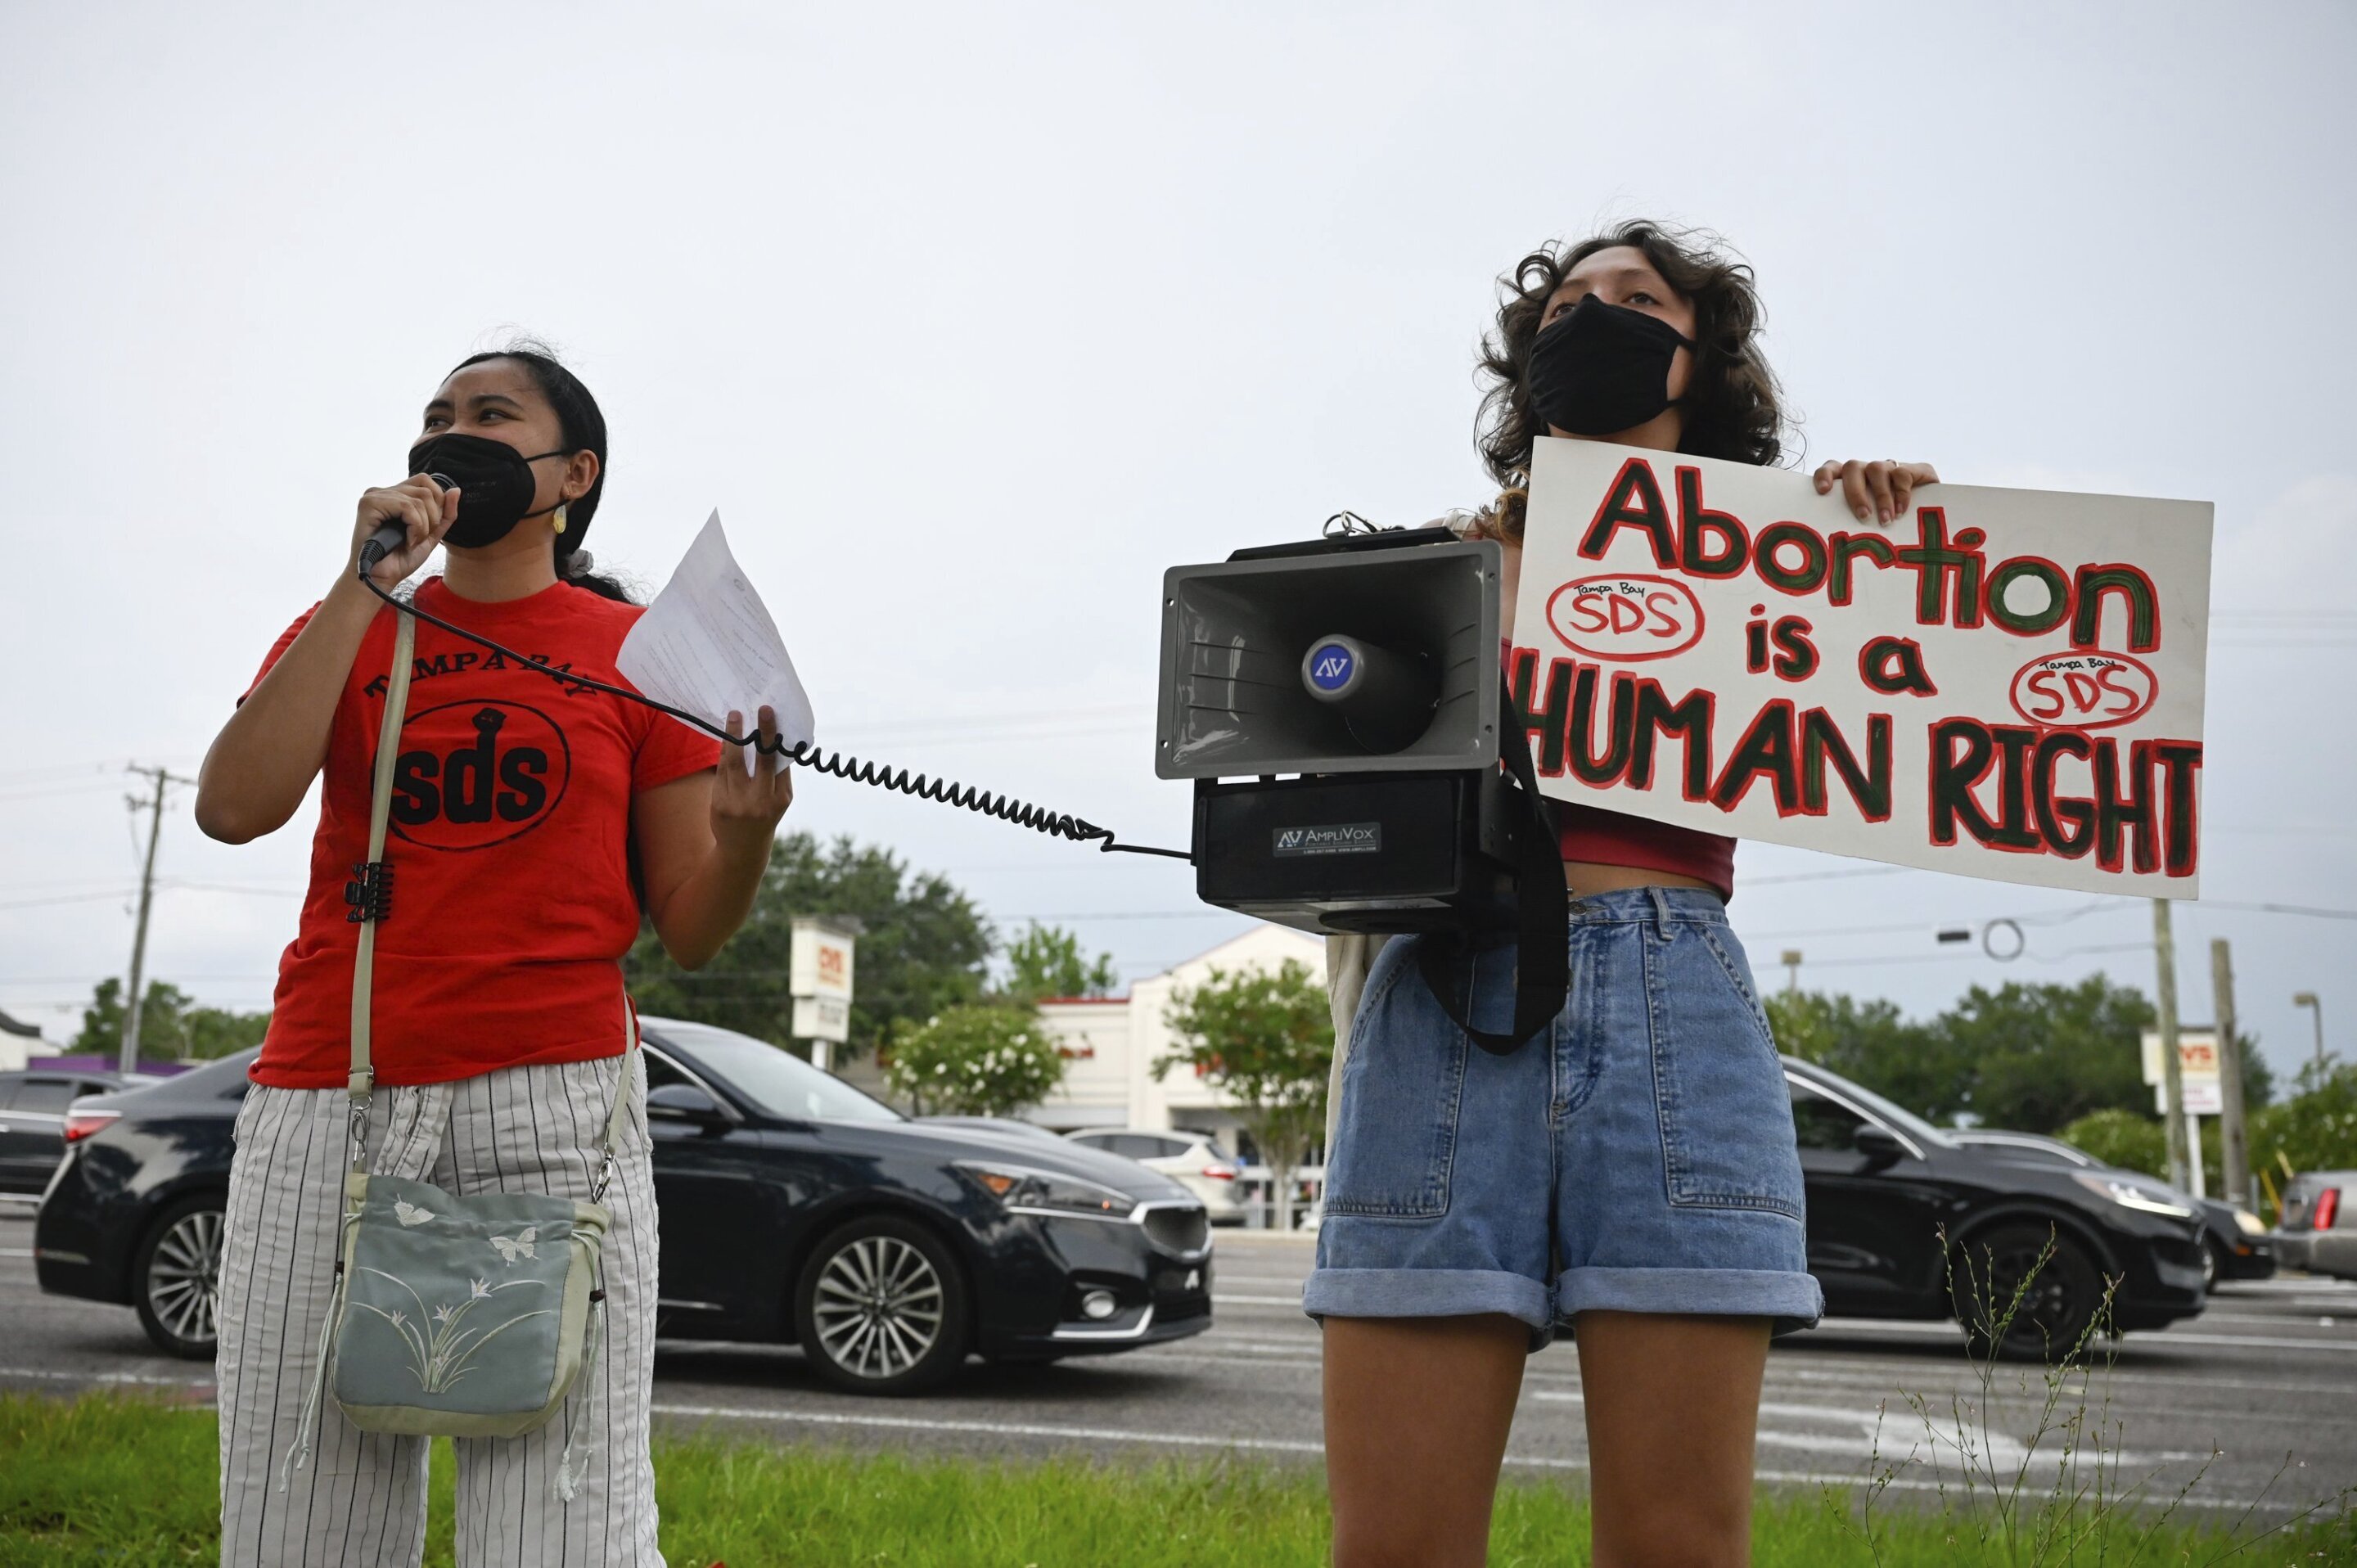 #Shifting abortion laws cause confusion for patients, clinics